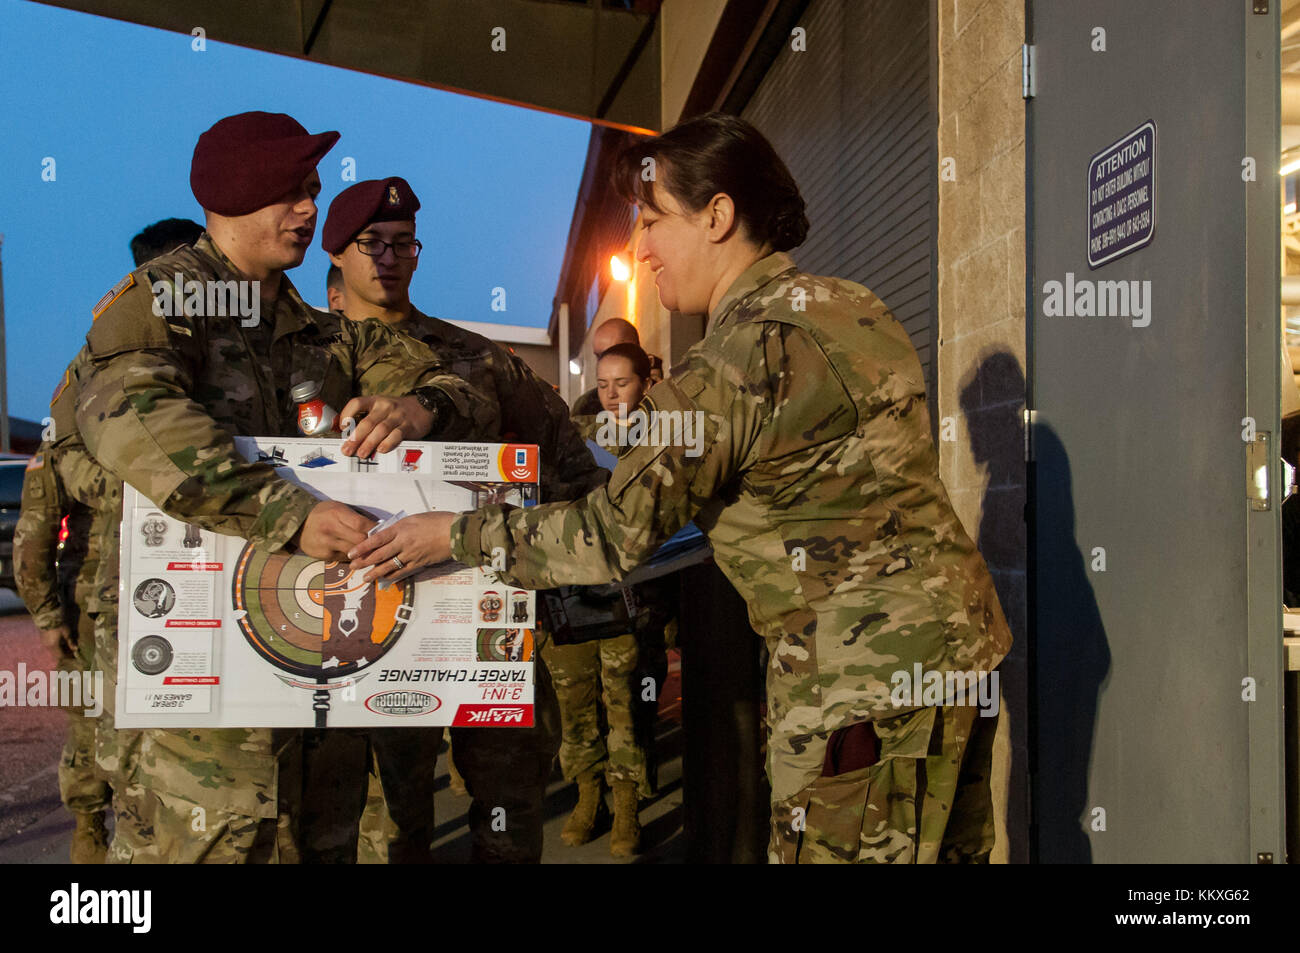 Fort Bragg, NC, USA. 1st Dec, 2017. Dec. 1, 2017 - FORT BRAGG, N.C., USA - Paratroopers enter the passenger shed at Green Ramp on Pope Army Airfield, Friday, to donate their toys at the 20th Annual Randy Oler Memorial Operation Toy Drop. The airborne operation, hosted by the U.S. Army Civil Affairs & Psychological Operations Command (Airborne), is the world's largest combined airborne operation with paratroopers from nine allied nations participating. The annual event allows paratroopers the opportunity to help children in communities surrounding Fort Bragg receive donated toys Stock Photo